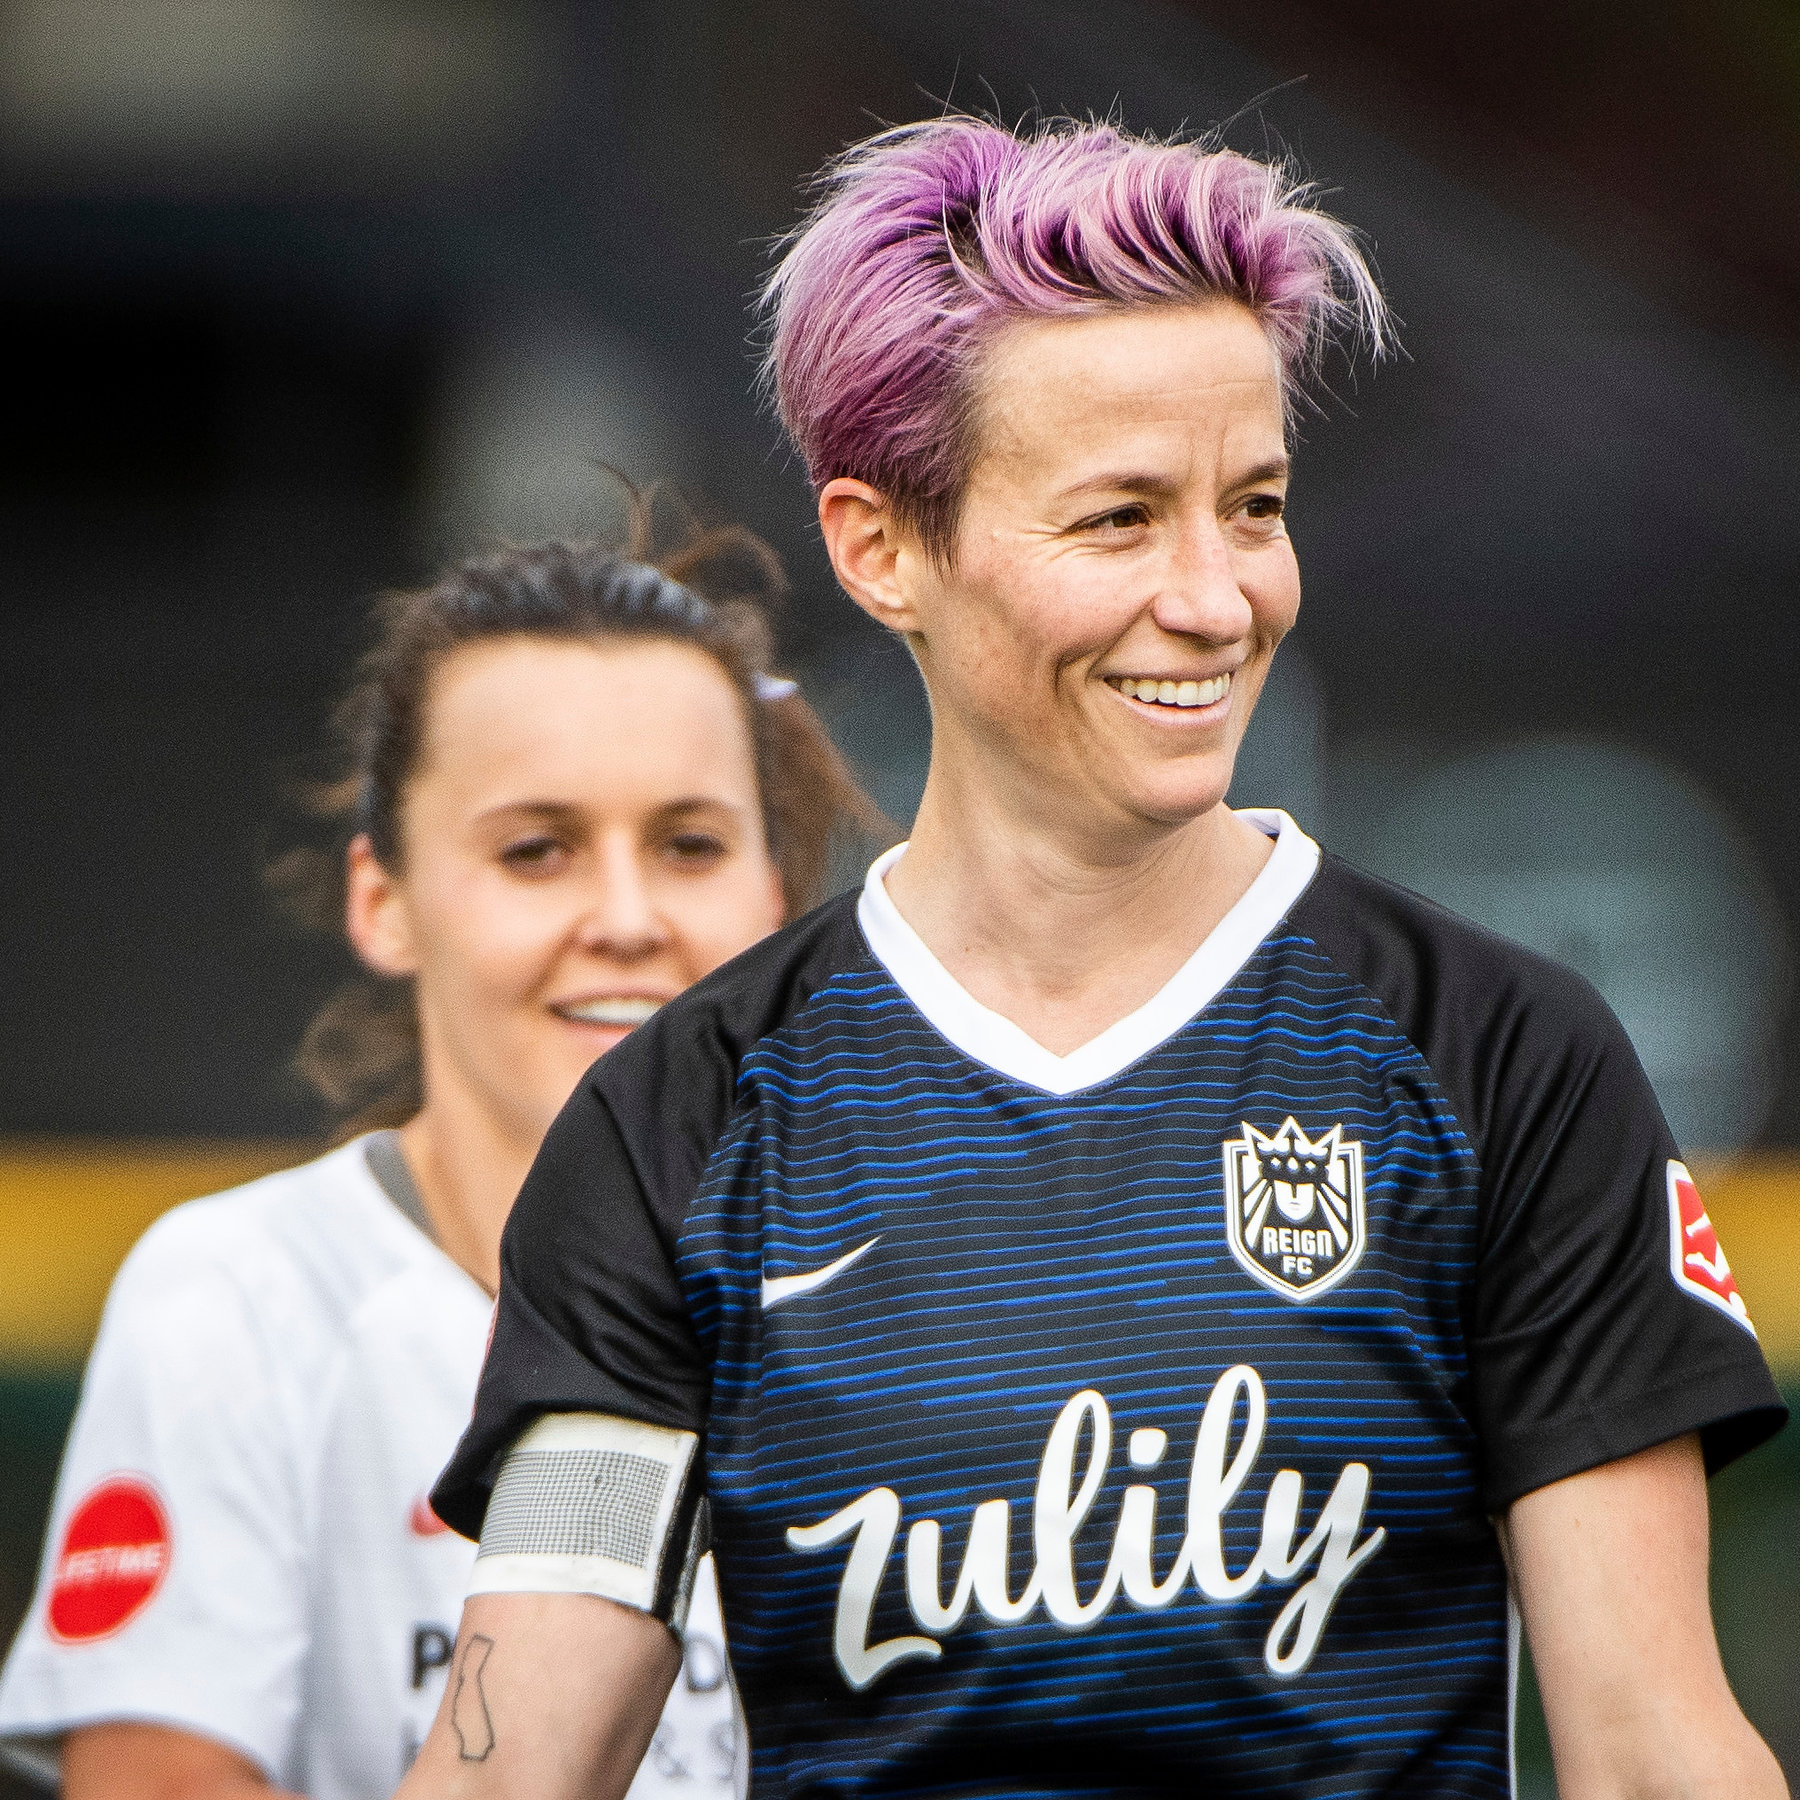 Which country did Megan Rapinoe play for in the 2011 FIFA Women's World Cup?